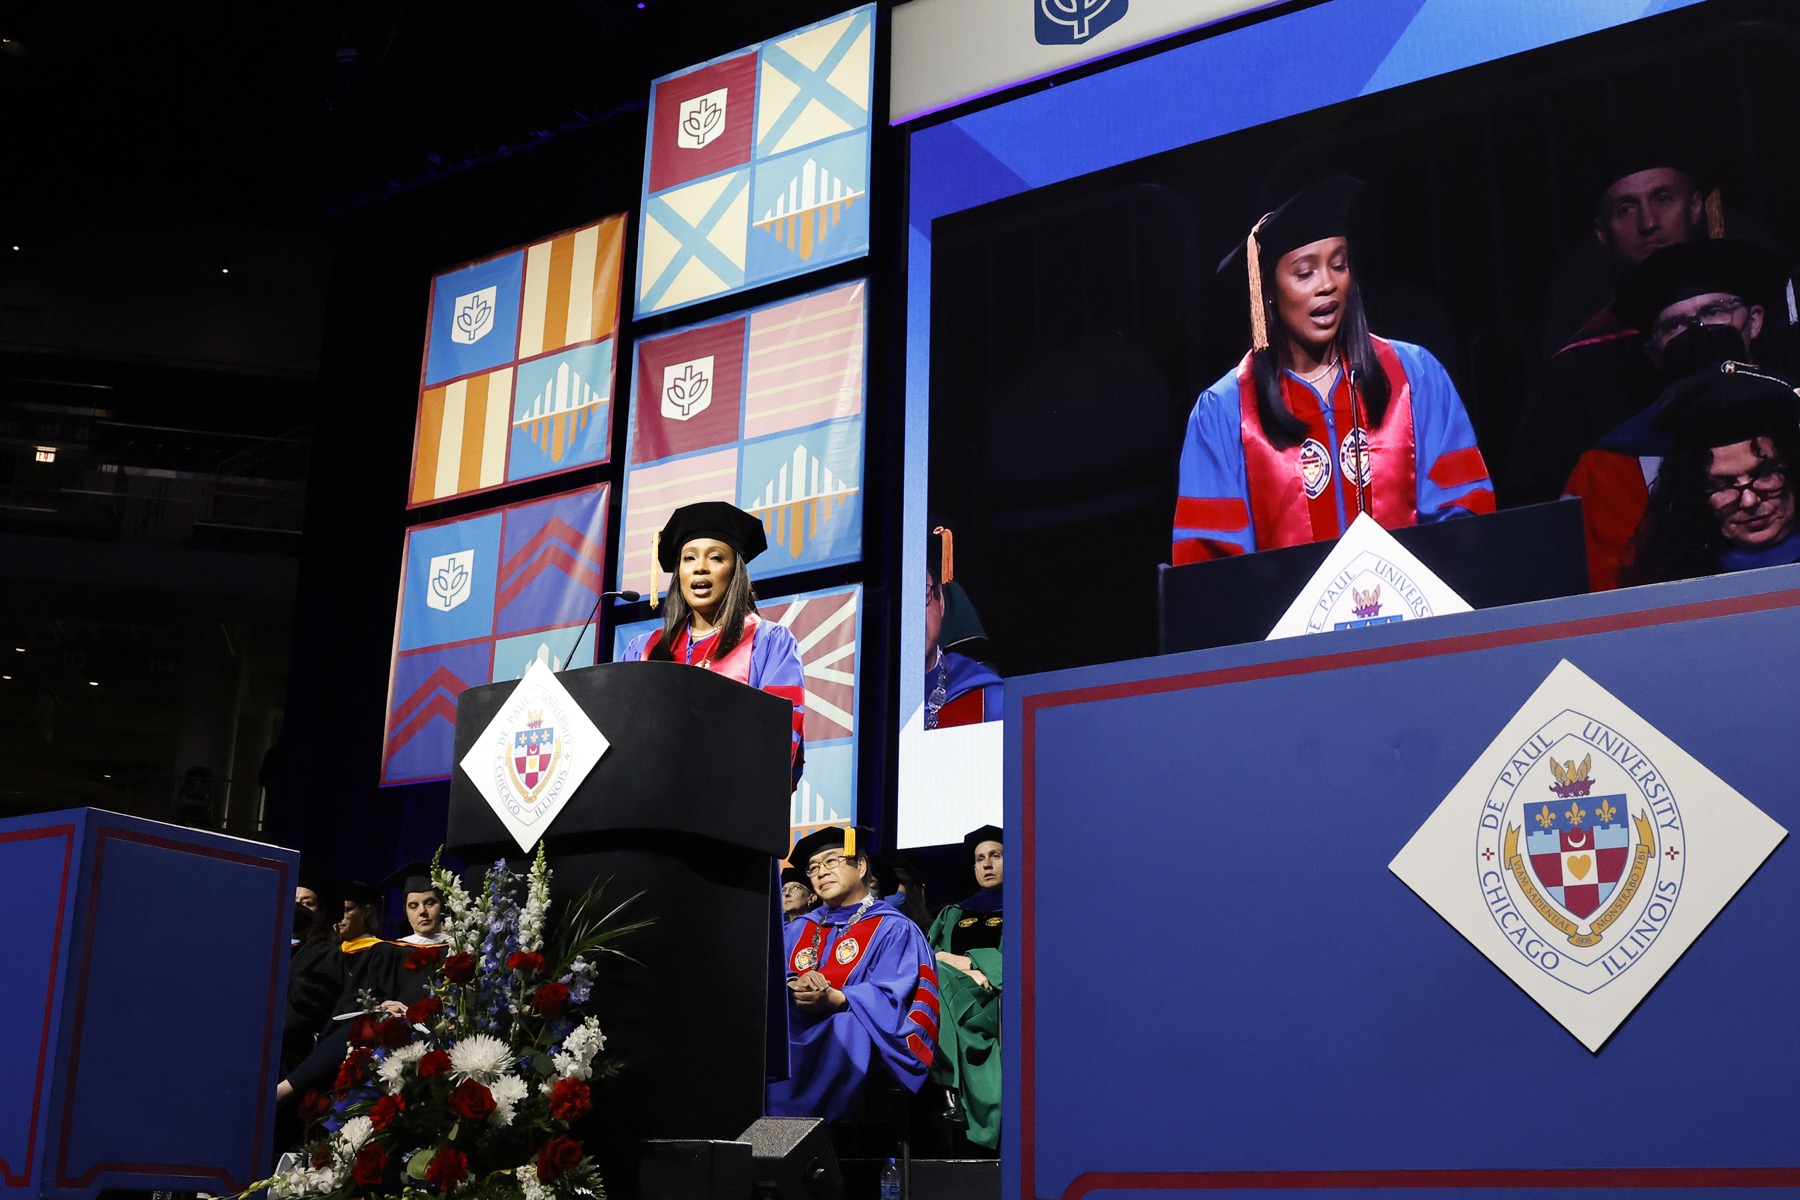 Tara-Ann Dugan delivers the student address at the DePaul University commencement ceremony for the Kellstadt Graduate School of Business.